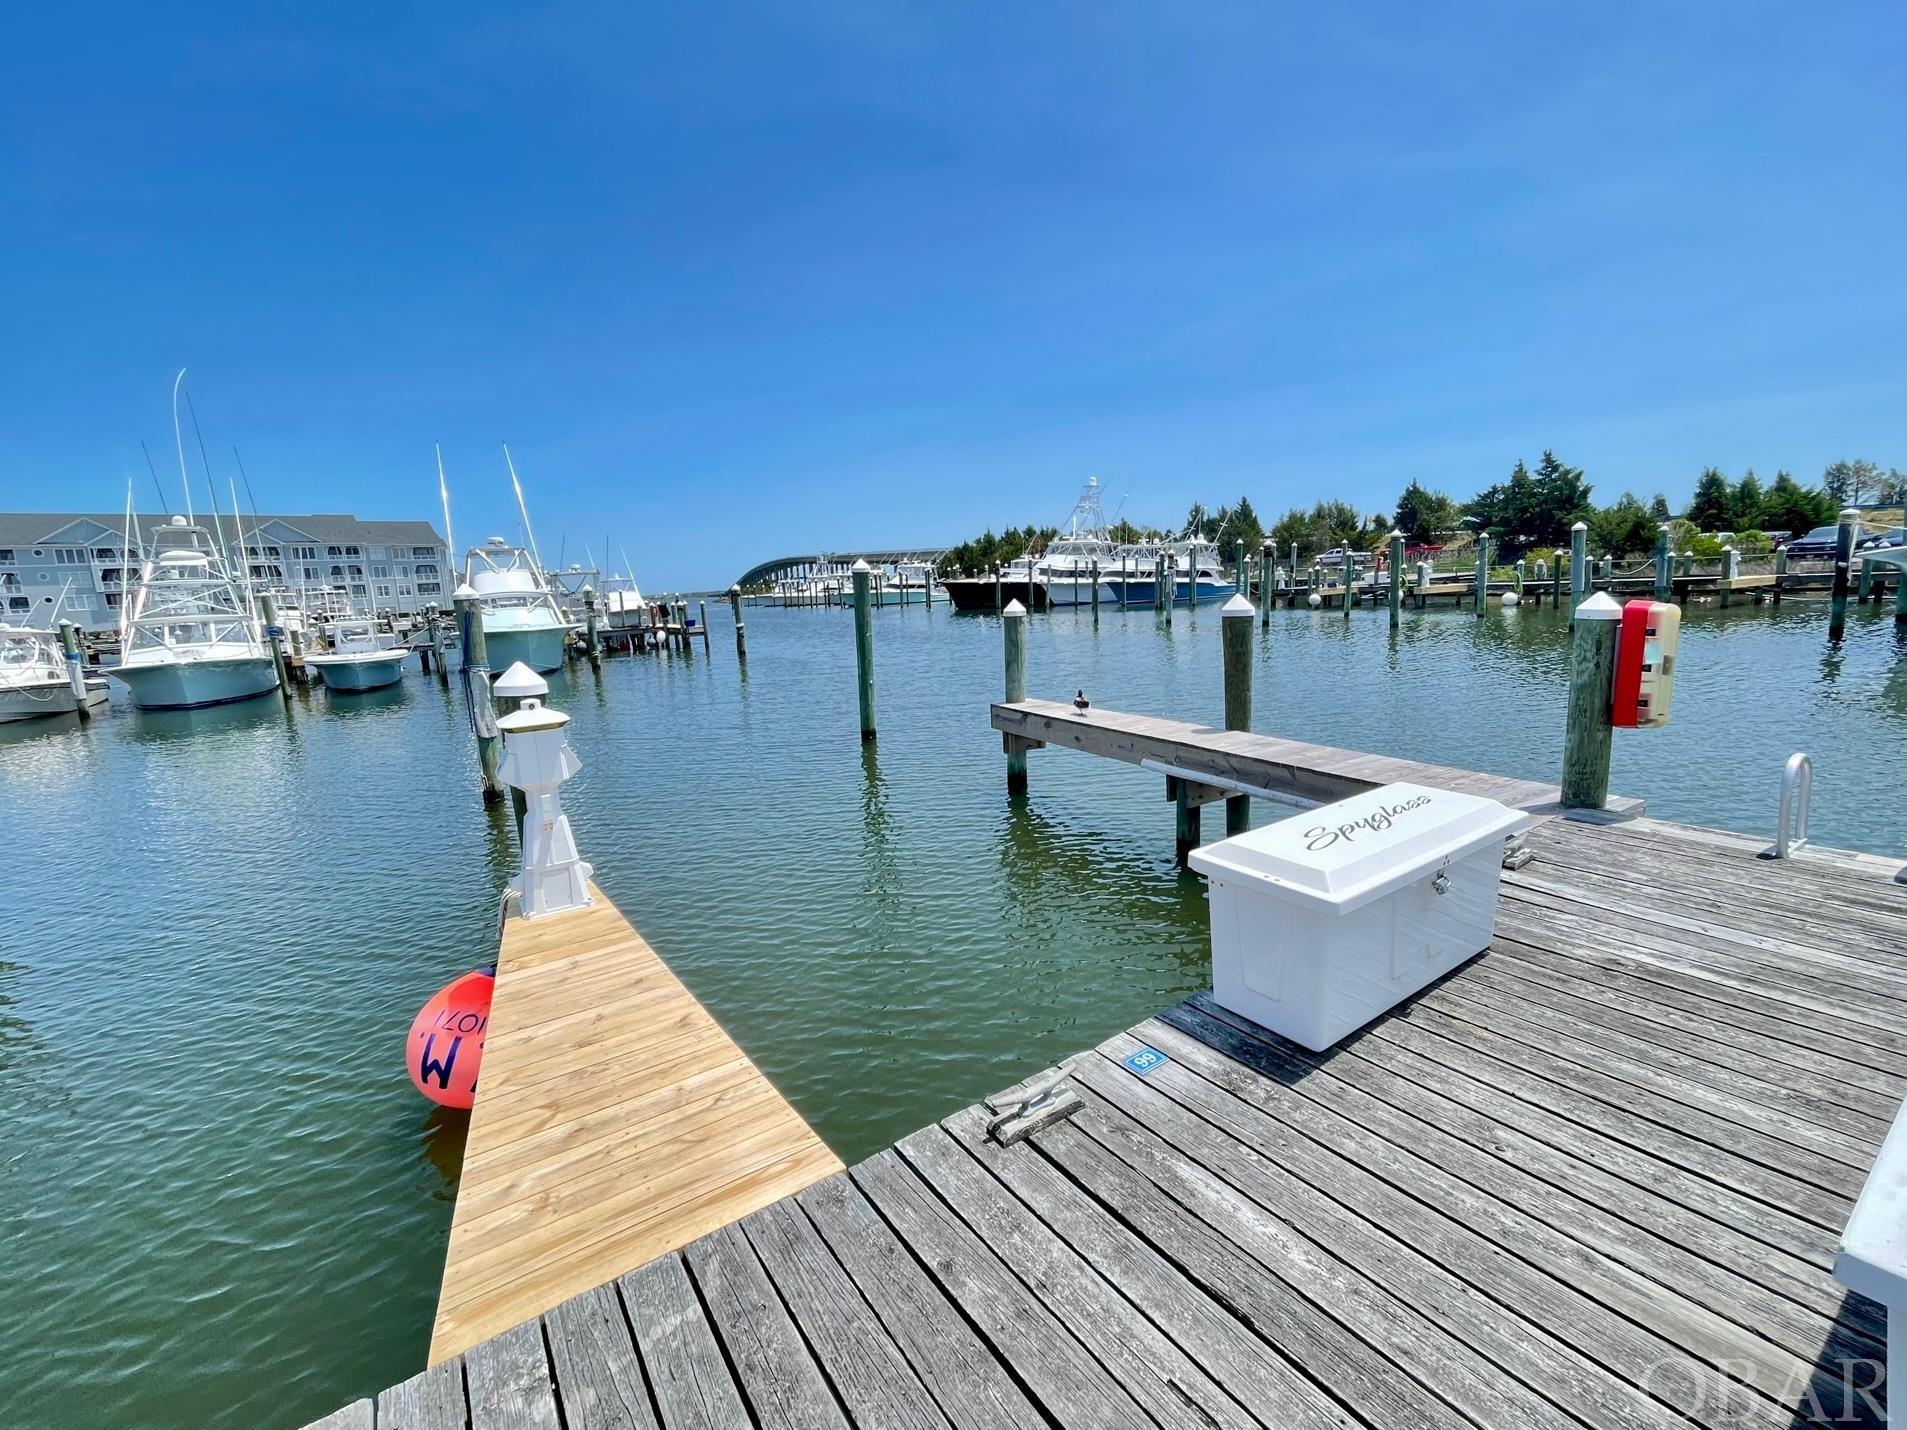 Convenient location at the end of B Dock means easy in/out access for this 45'x16' boat slip.  Less than two year old dock box conveys. Enjoy new finger piers, fish cleaning stations throughout the marina, and easy access to parking.  Pirates Cove Marina is a world class fishing destination with Ship's Store, Tiki Bar, Bath House and Restaurant. Come check out this boat slip today!  Access to community amenities available for an additional fee.